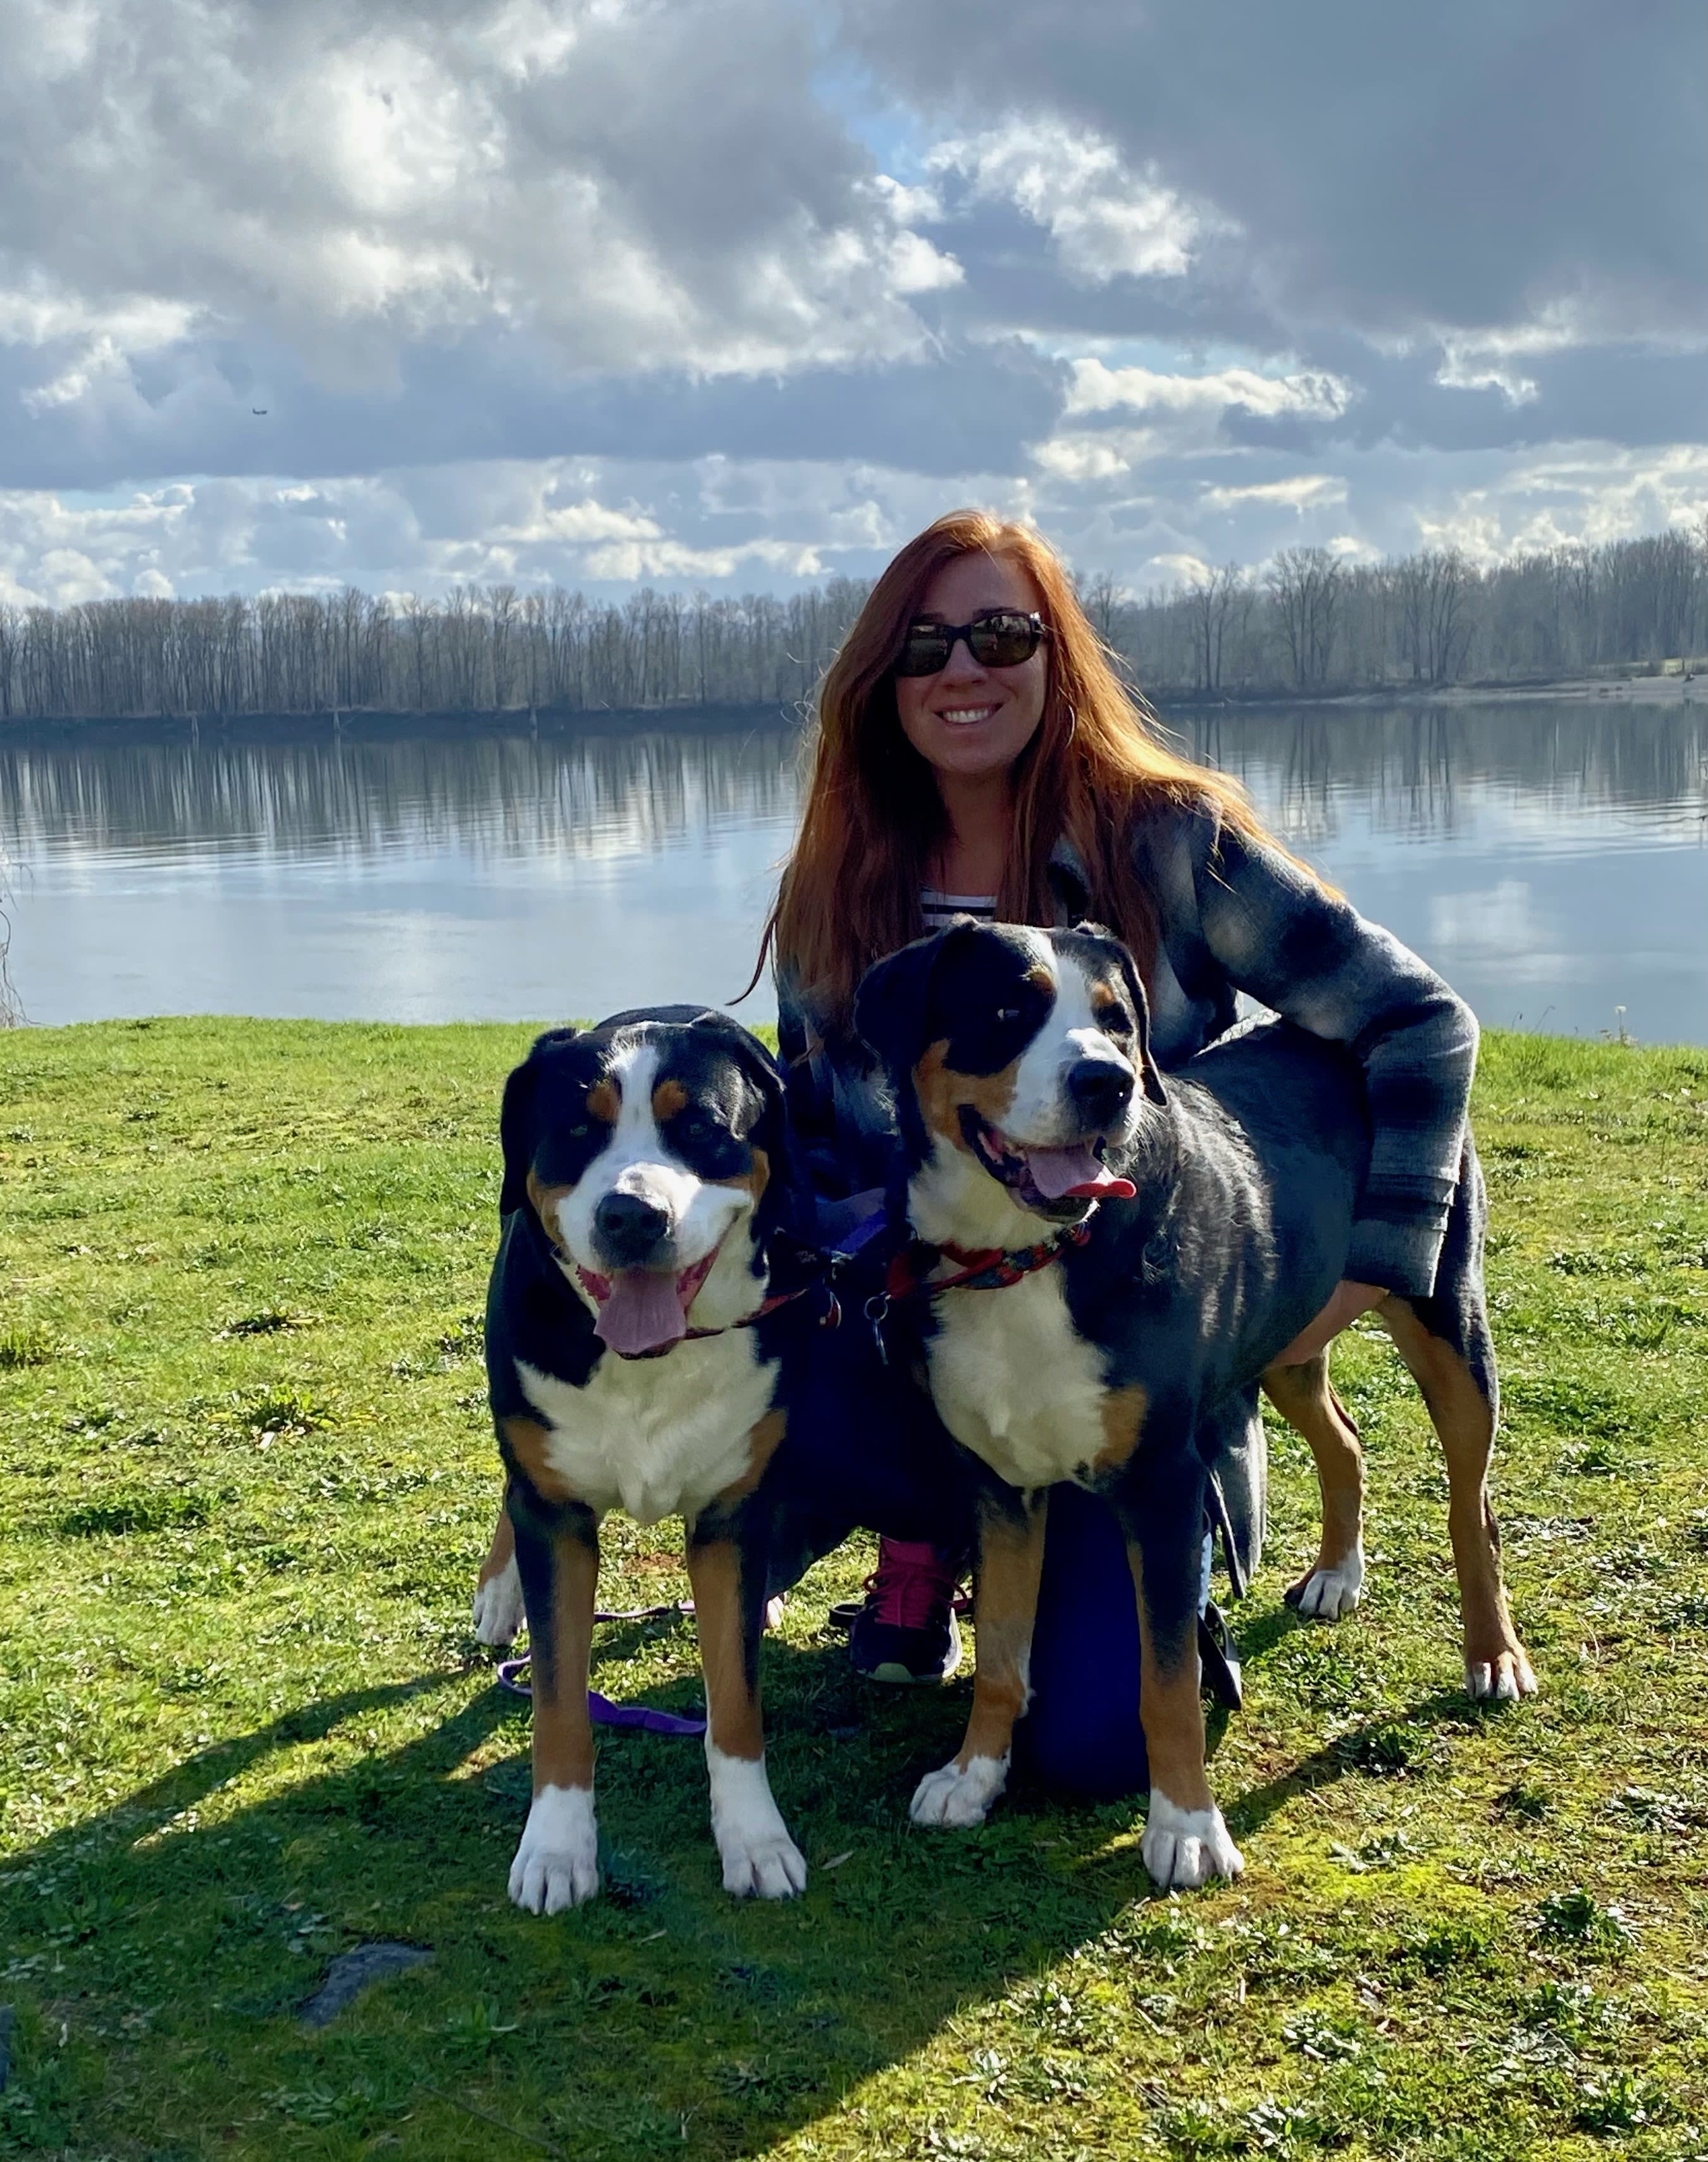 April from Touchmark Central Office in Beaverton, Oregon with her two dogs